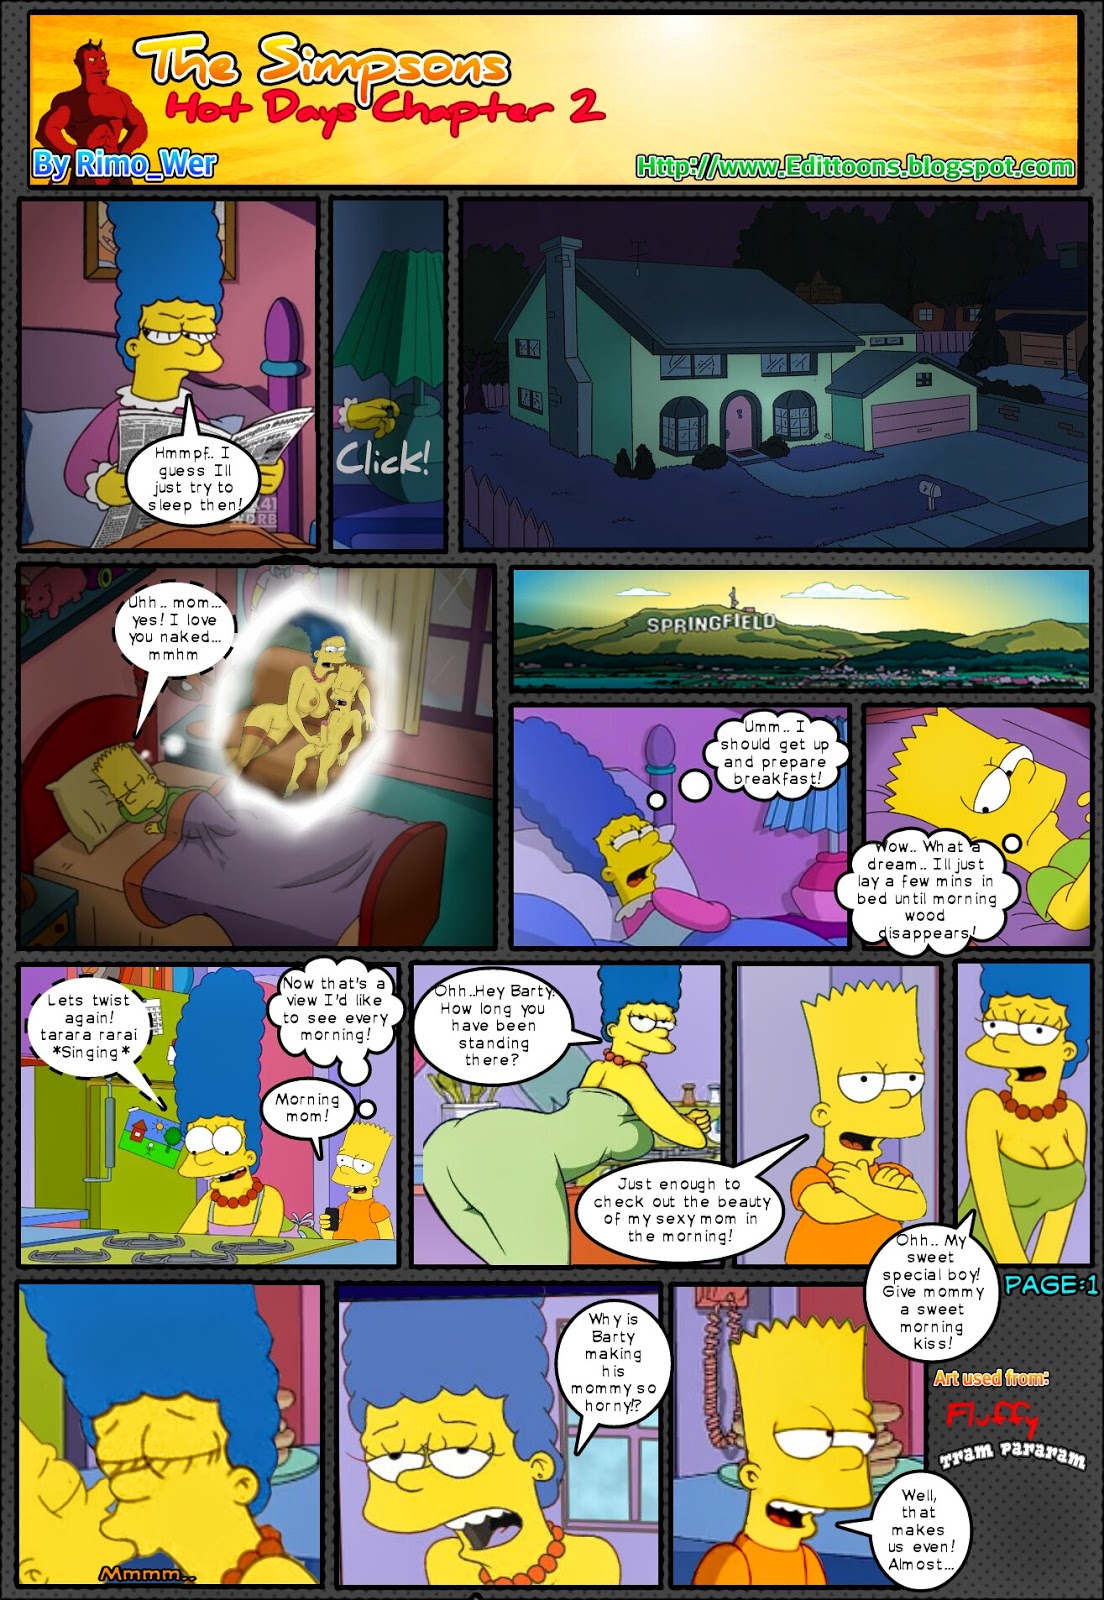 Naked Toons Simpsons - edittoons adult cartoon comics rimo wer the simpsons hot days - XXXPicz